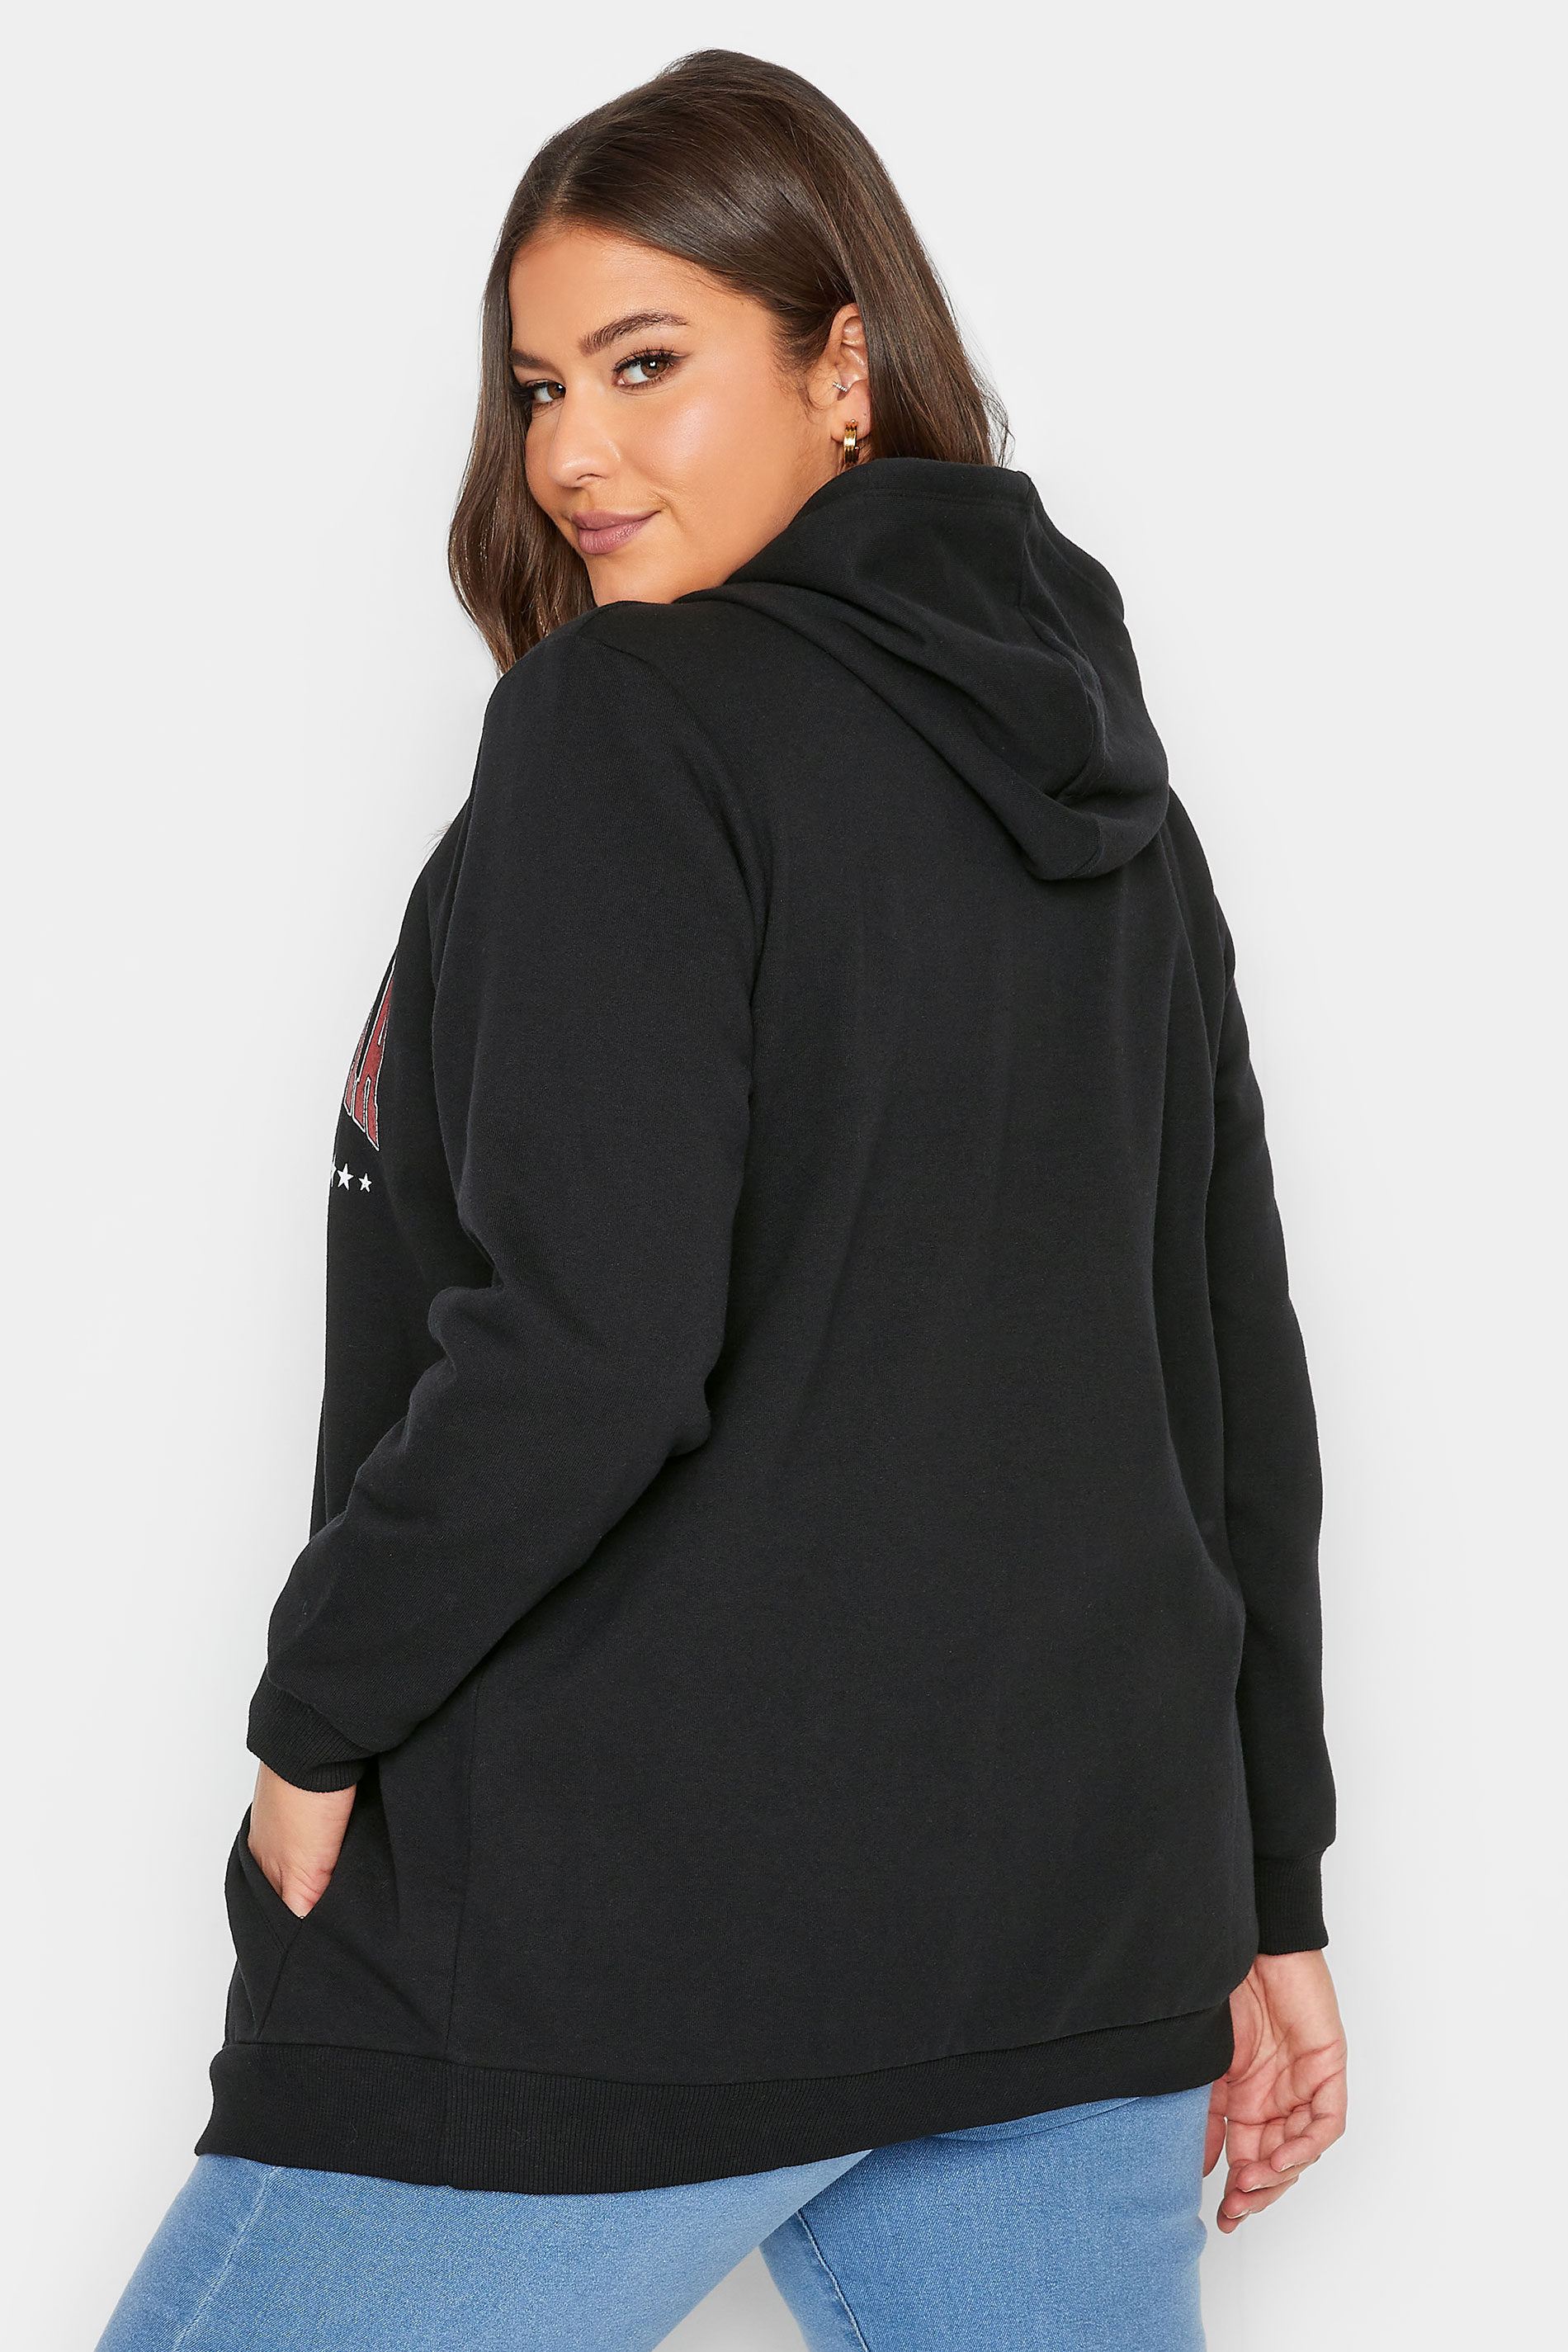 YOURS Curve Plus Size Black 'California' Slogan Zip Up Hoodie | Yours Clothing  3